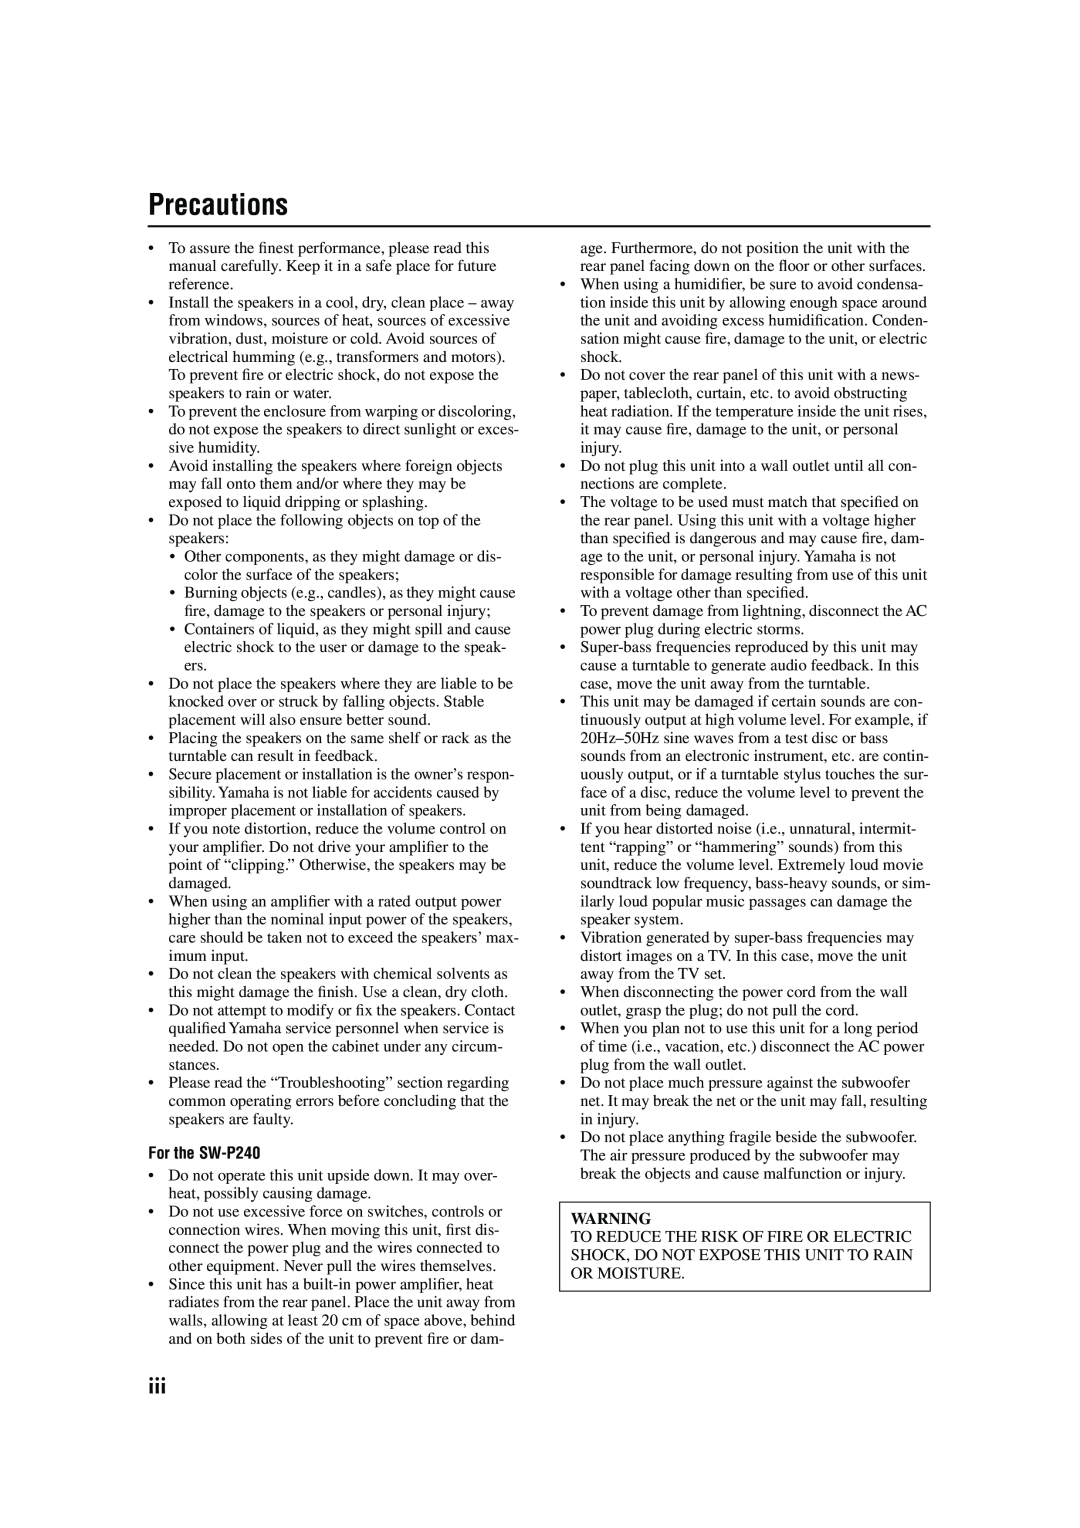 Yamaha RX-SL80 owner manual Precautions, For the SW-P240 